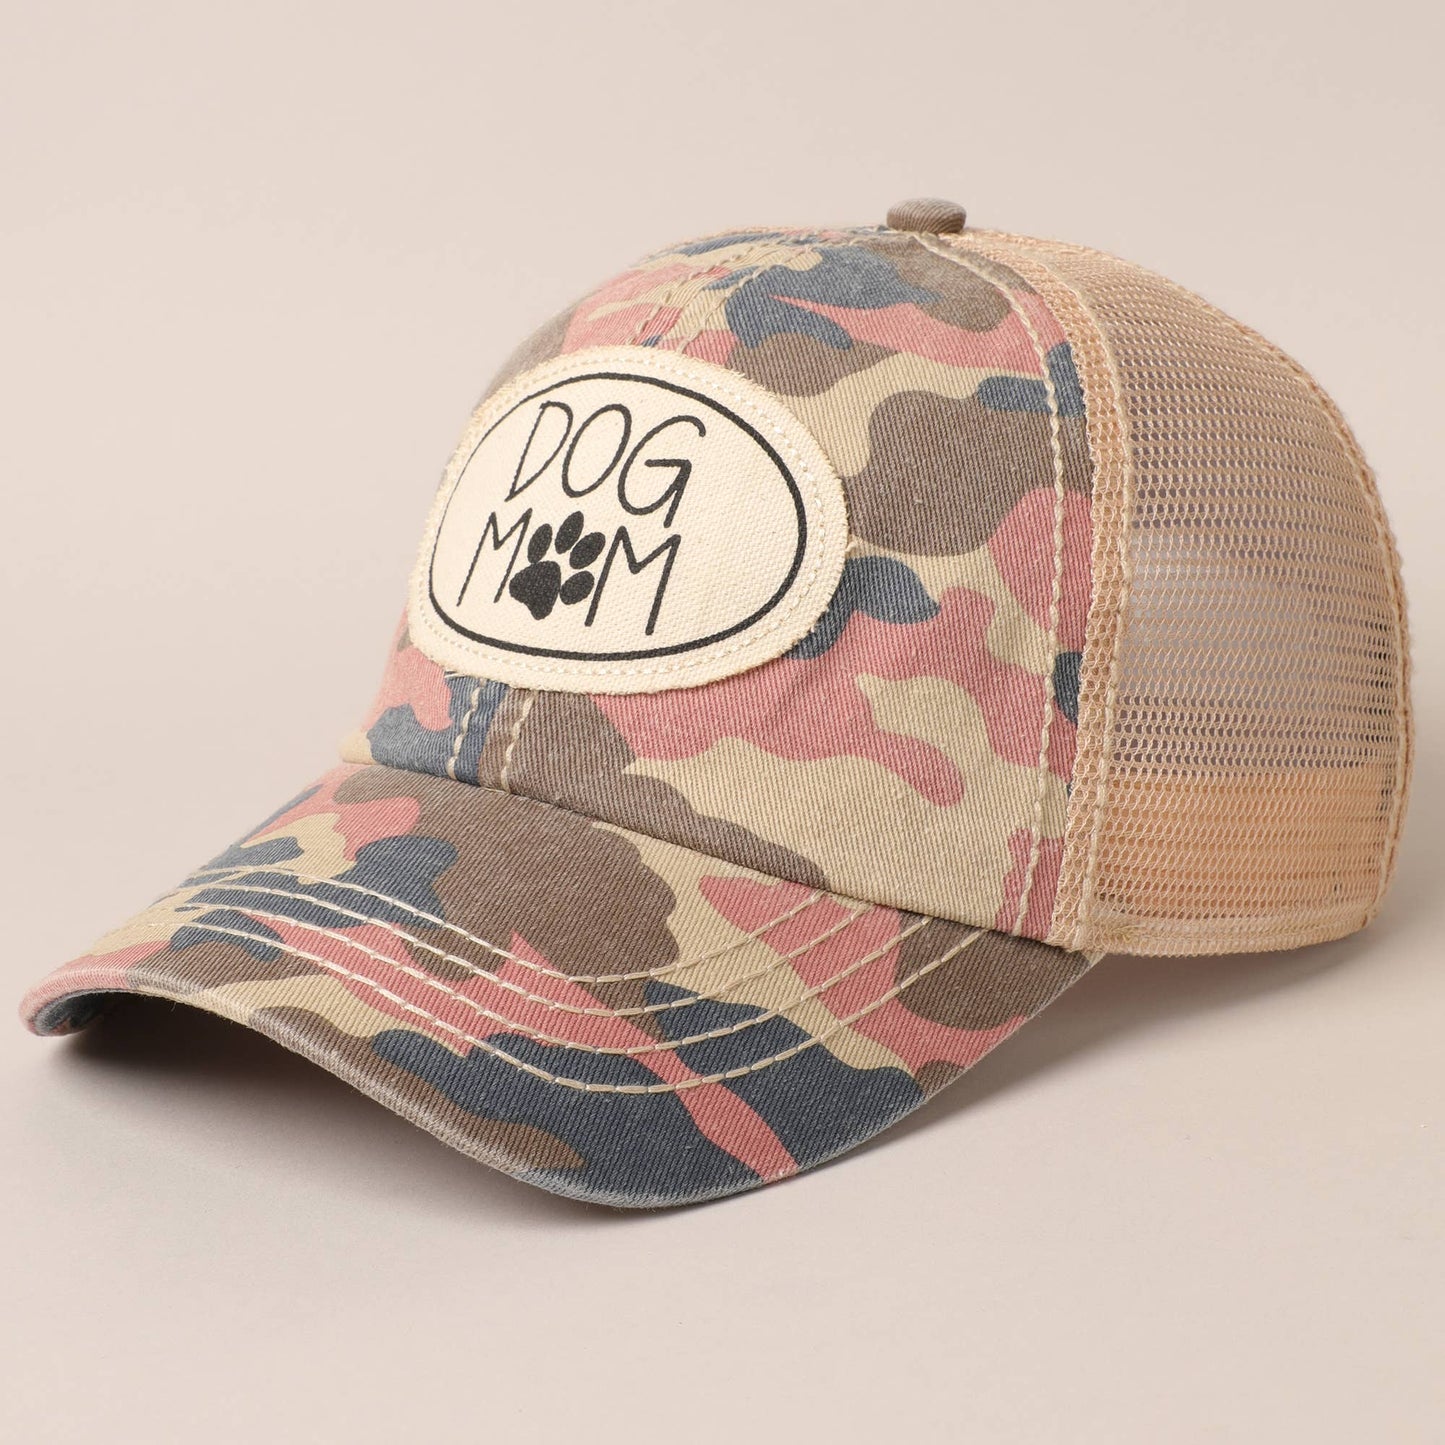 Dog Mom Canvas Patch Mesh Back Baseball Cap: One Size / PINK CAMO